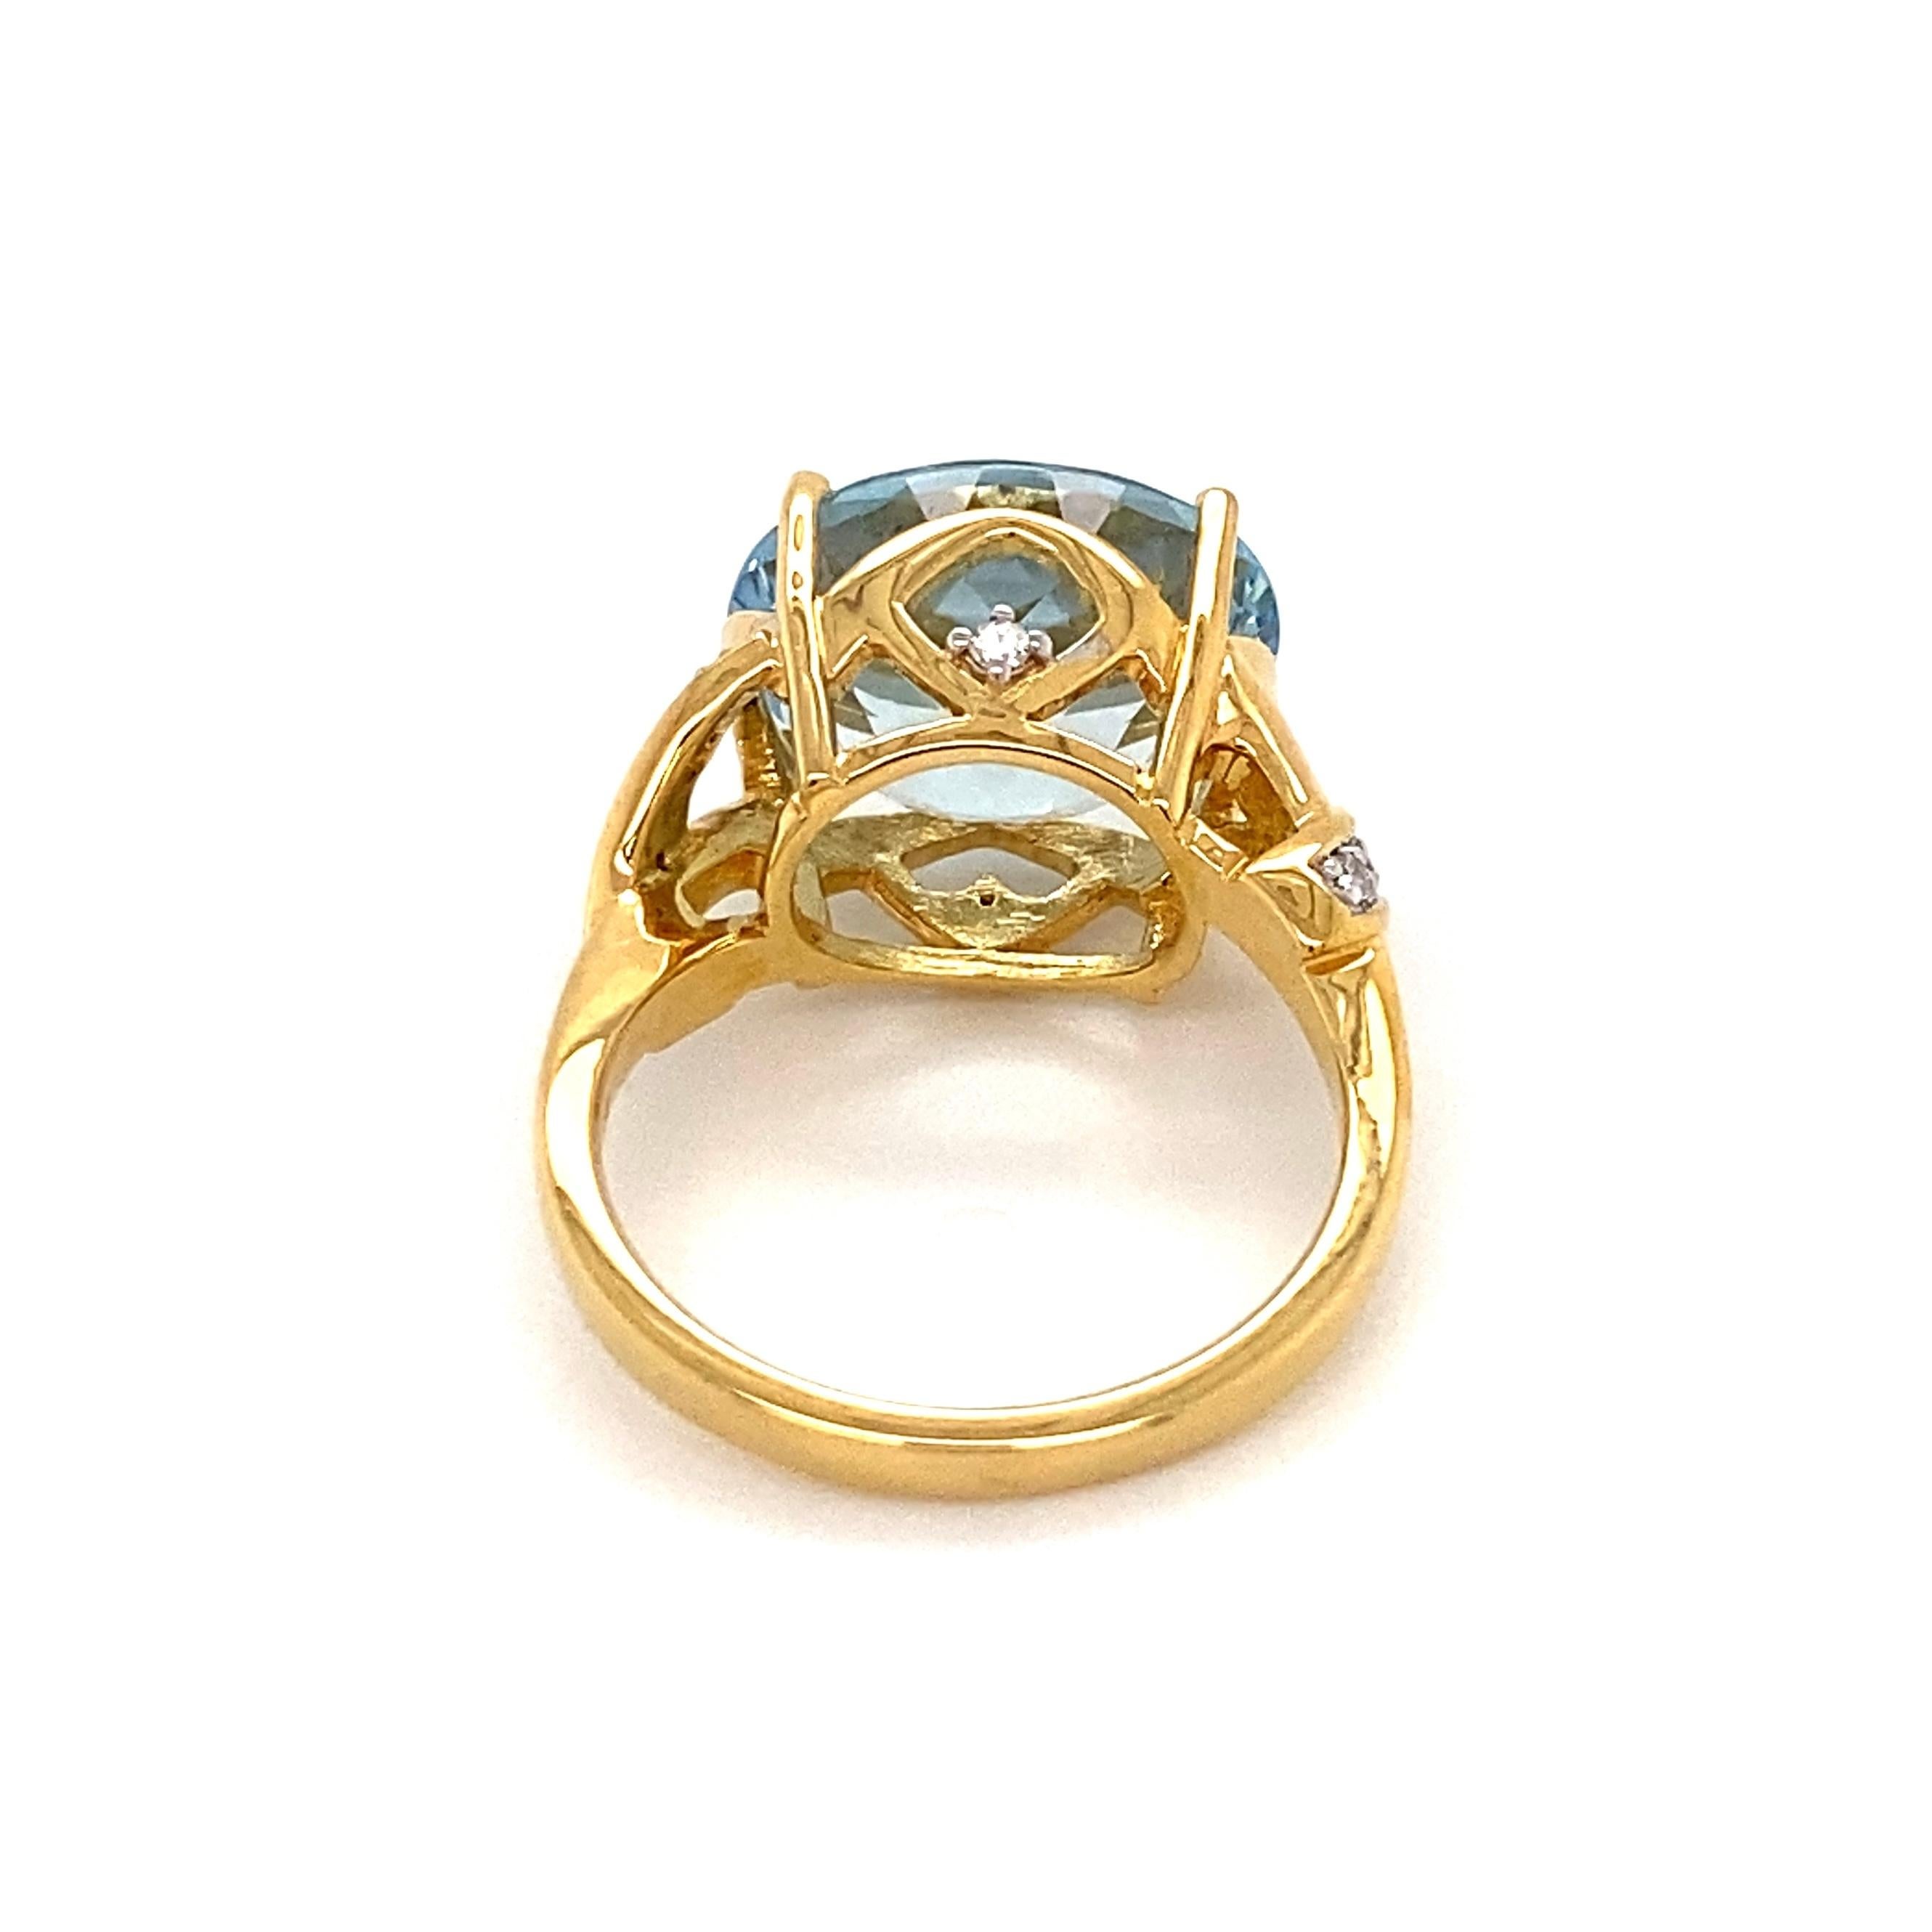 7.61 Carat Aquamarine and Diamond Art Deco Revival Gold Ring In Excellent Condition For Sale In Montreal, QC